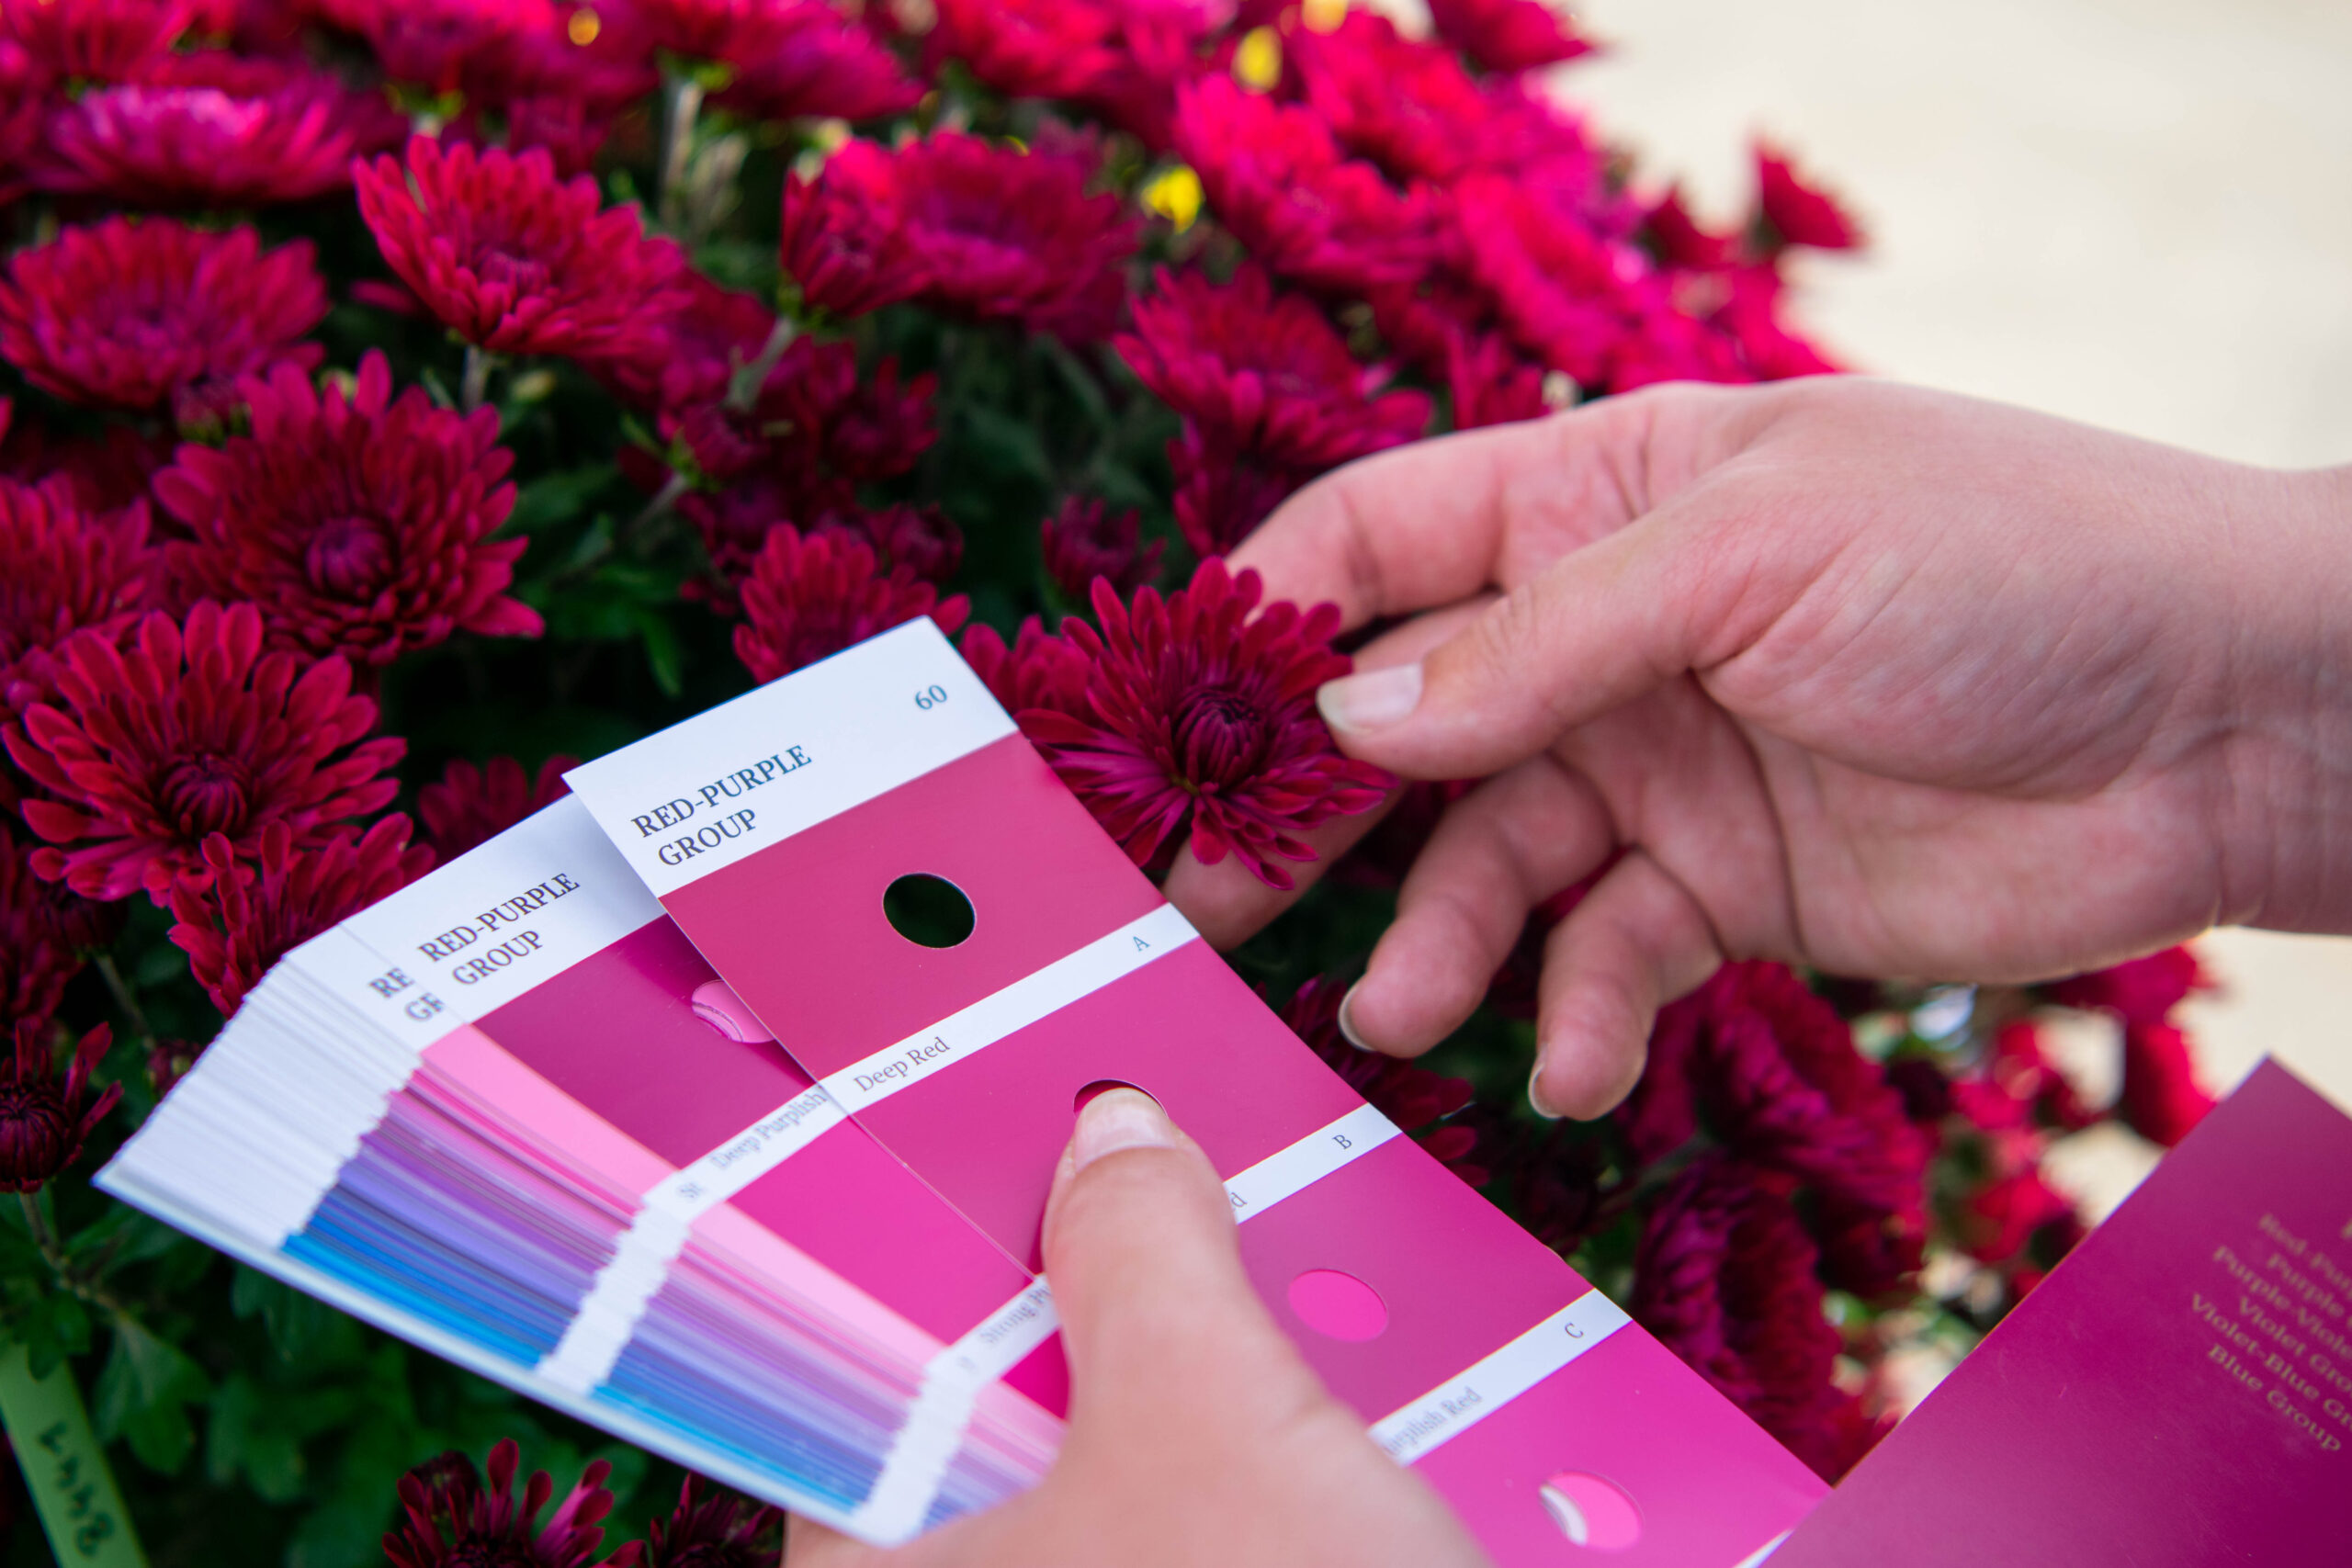 Colour measurements and plant breeders’ rights